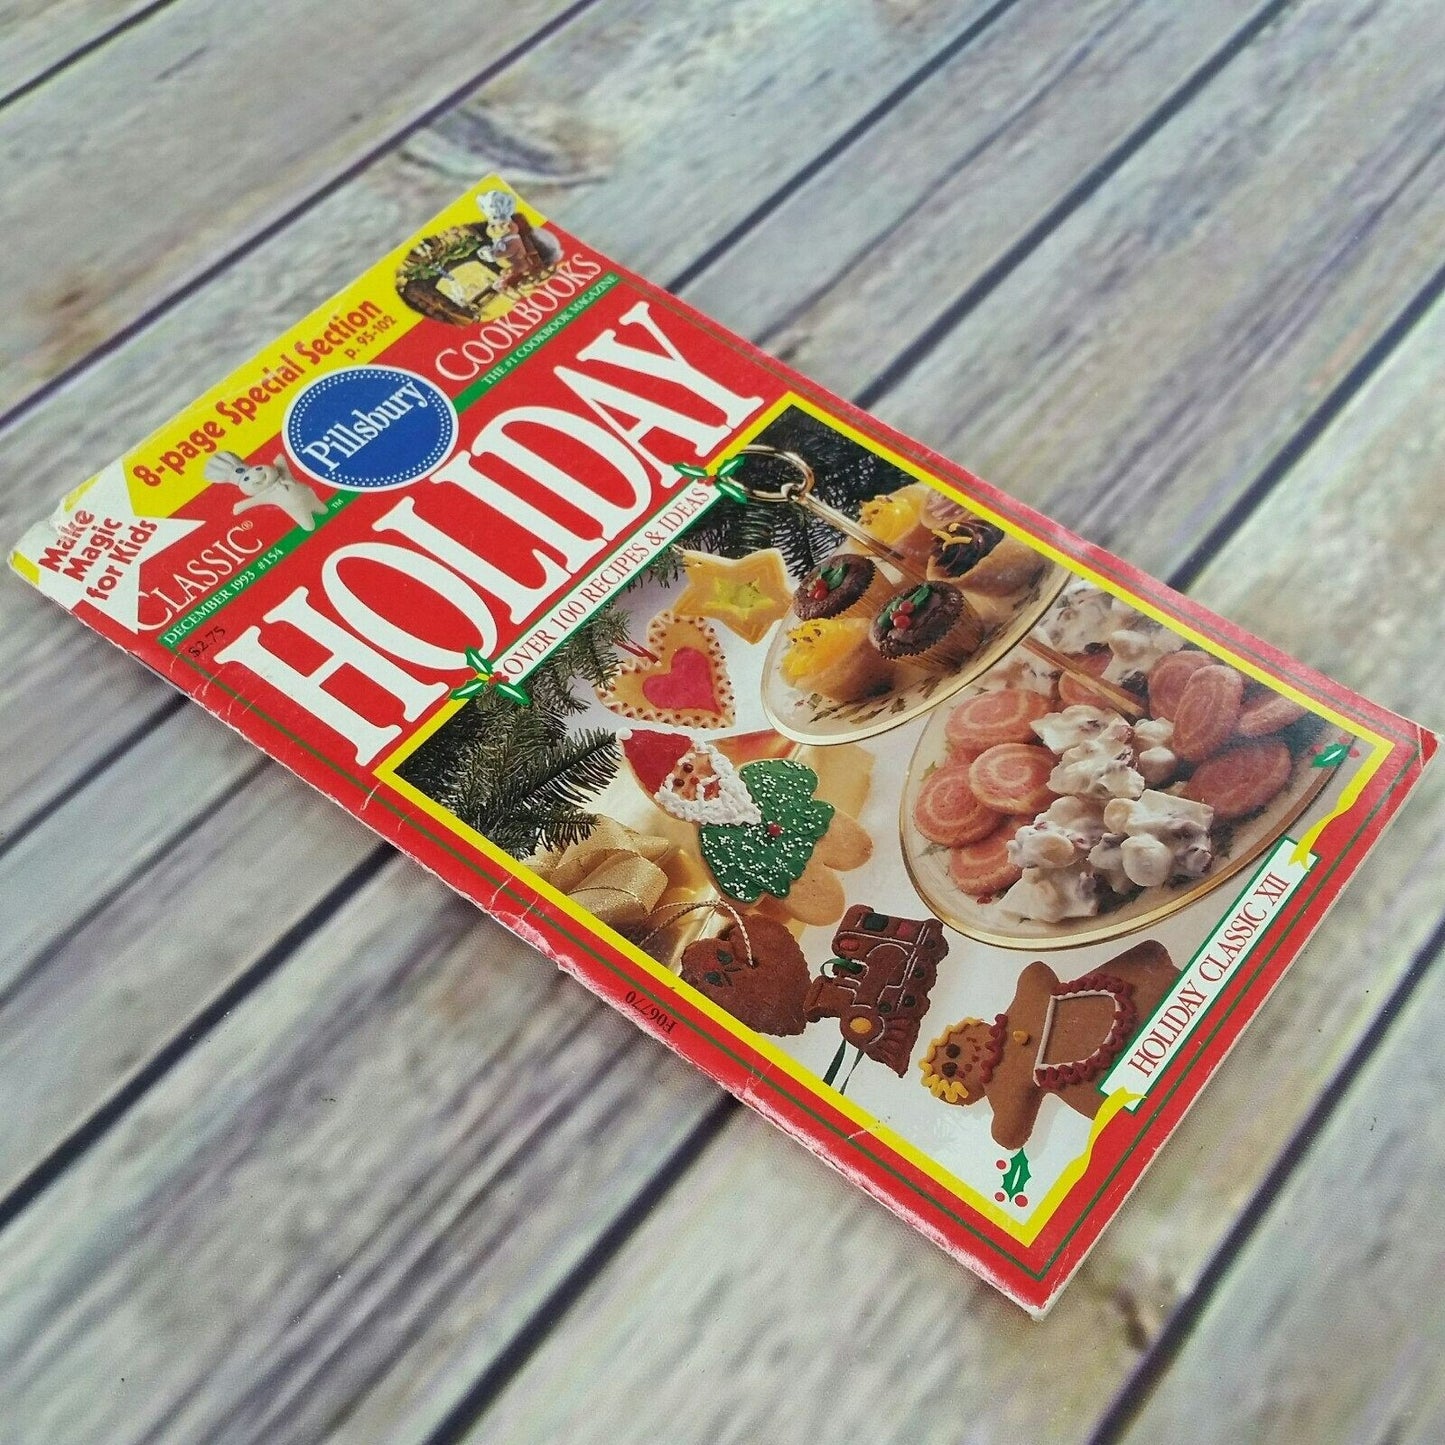 Vintage Cookbook Pillsbury Holiday Classic XII Recipes Paperback Booklet 1993 Pamphlet